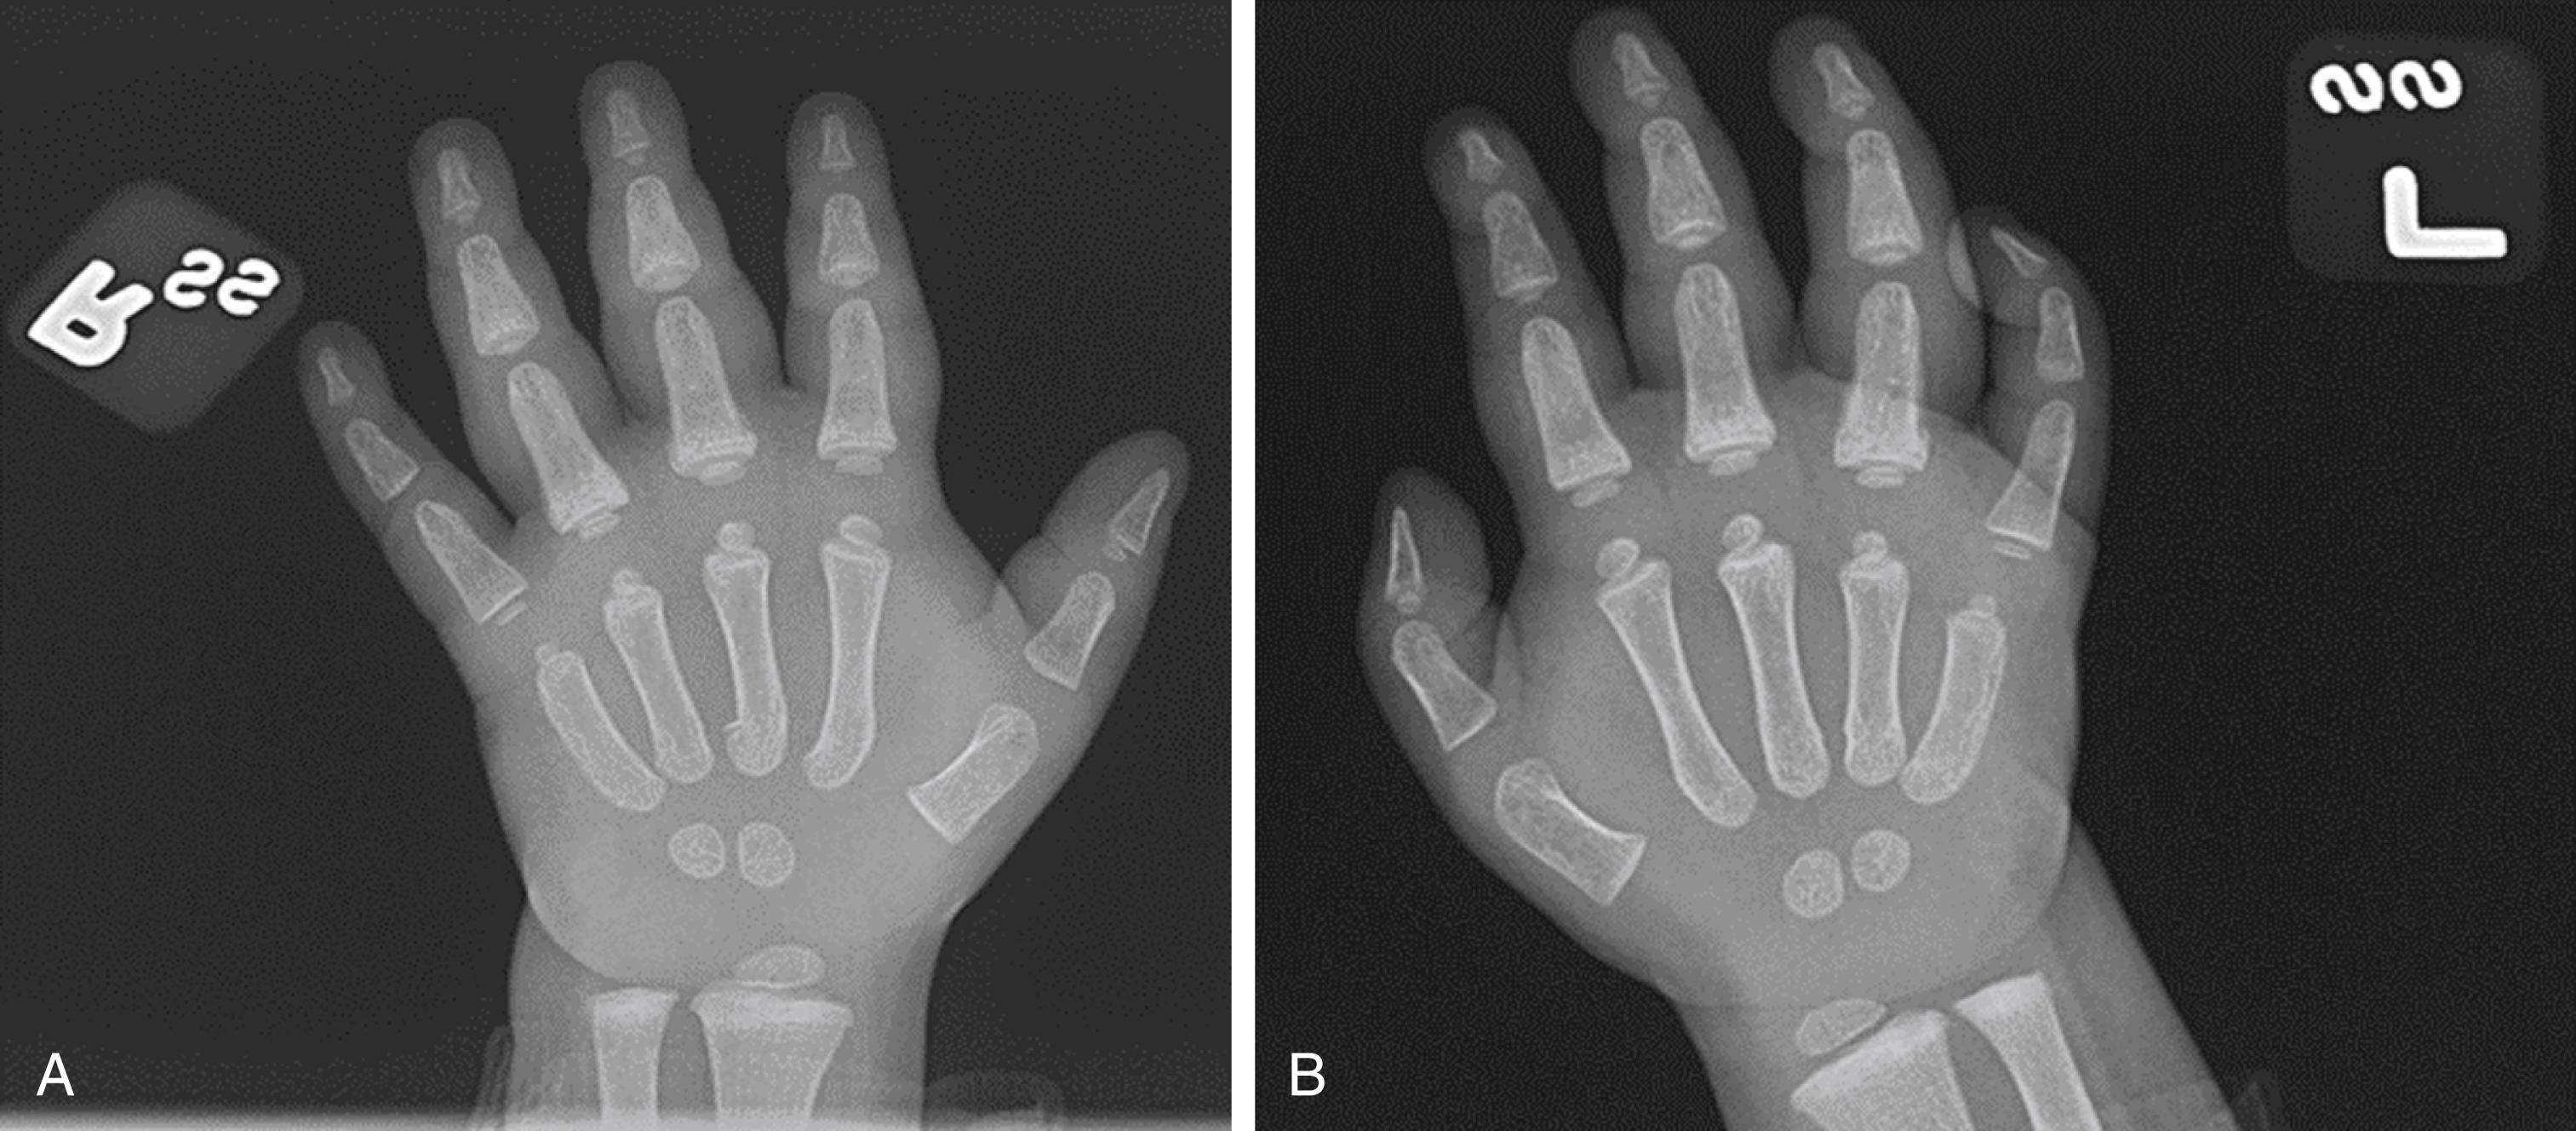 Fig. 6.33, (A and B) 18 m/o with unexplained hand swelling, brought to care multiple times. Child ultimately sent to a children’s hospital due to concern for a rheumatologic disease. Child found to have multiple acute and healing metacarpal and phalanx fractures in both hands which were diagnostic of physical child abuse.